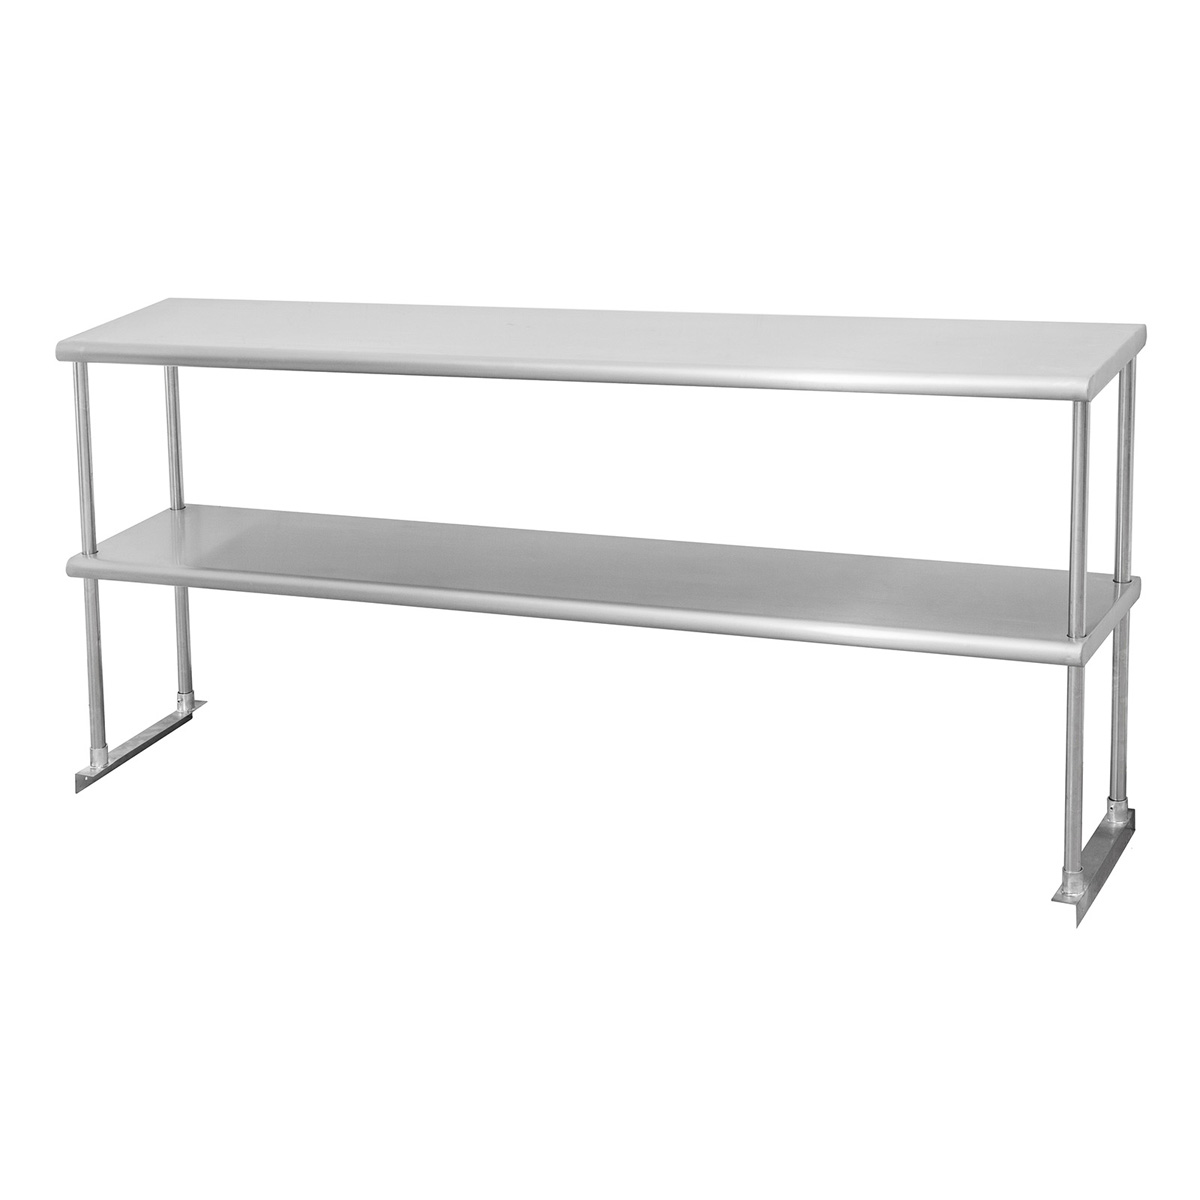 Sapphire Manufacturing DBS18X60 60"W x 18"D Table Mounted Overshelf